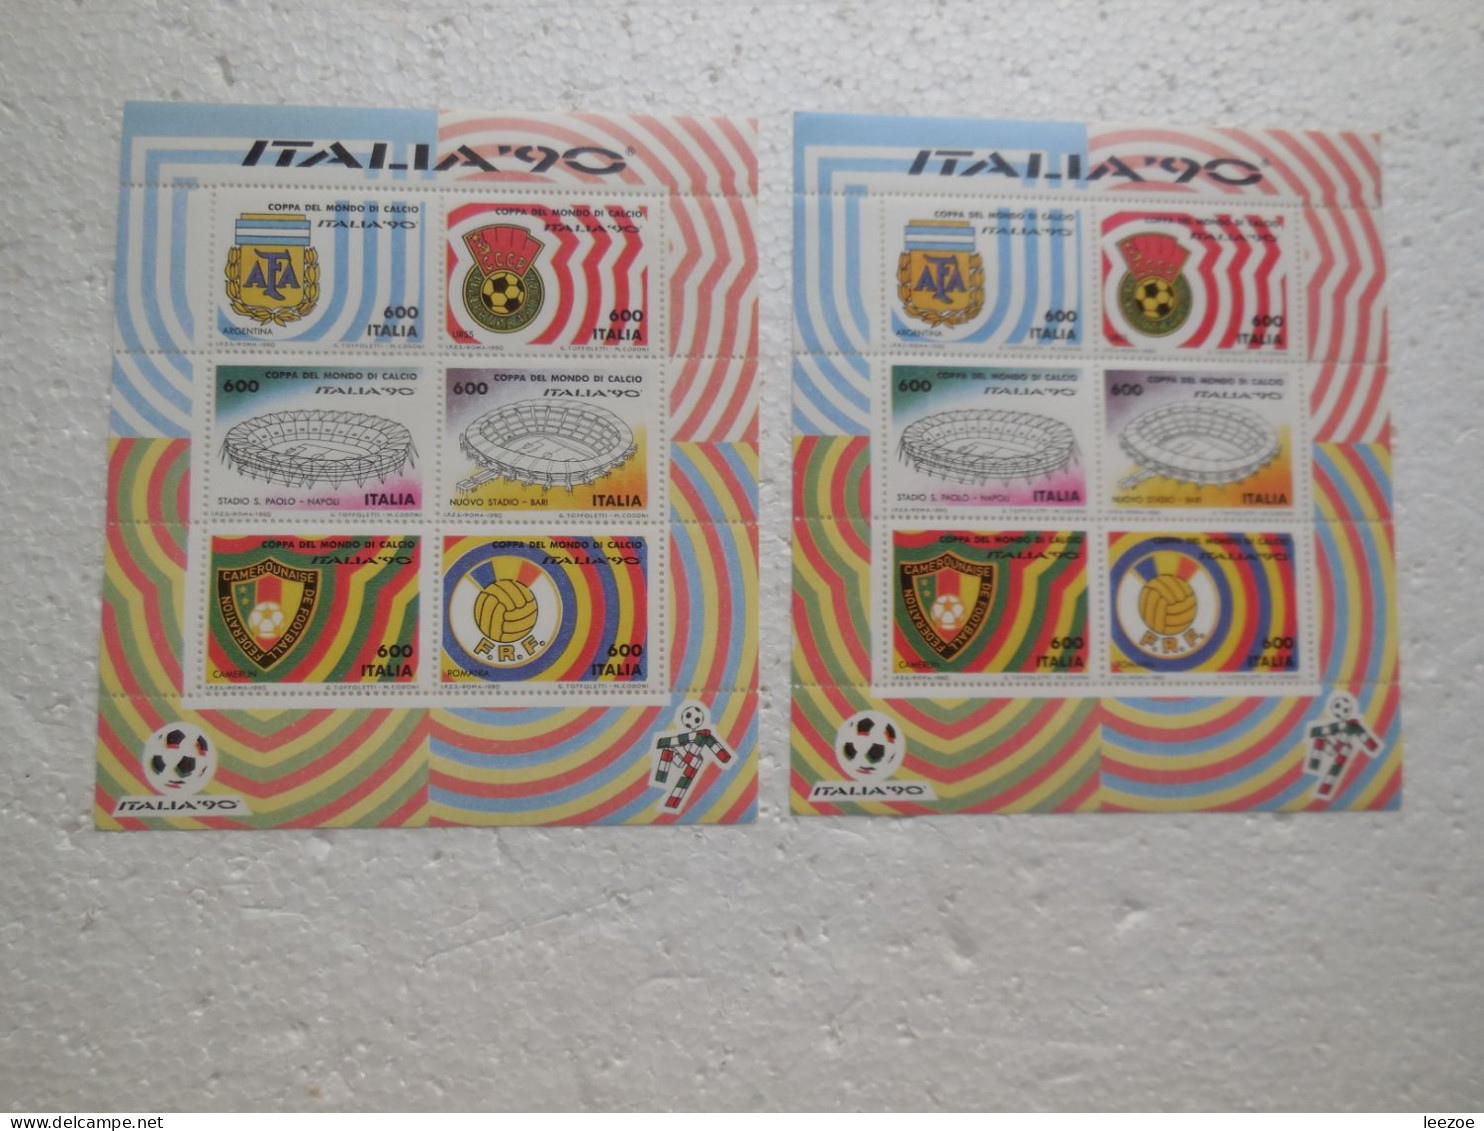 STAMP ITALIA, lot TIMBRES ITALIEN, timbres FOOT ITALIA 90.  ...ref N5/40/8